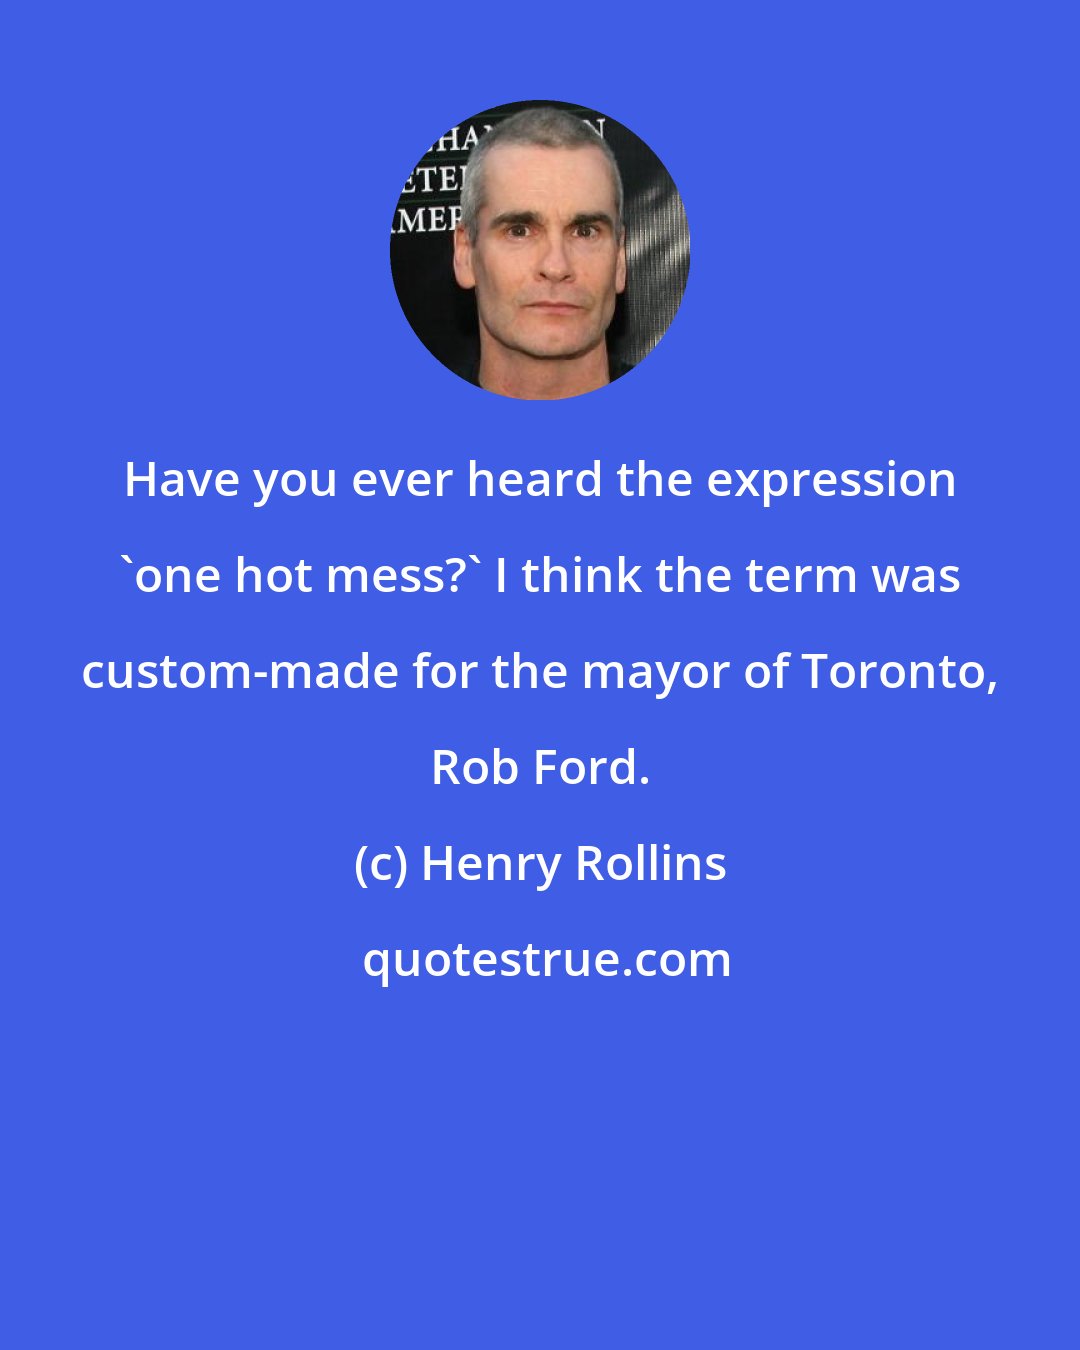 Henry Rollins: Have you ever heard the expression 'one hot mess?' I think the term was custom-made for the mayor of Toronto, Rob Ford.